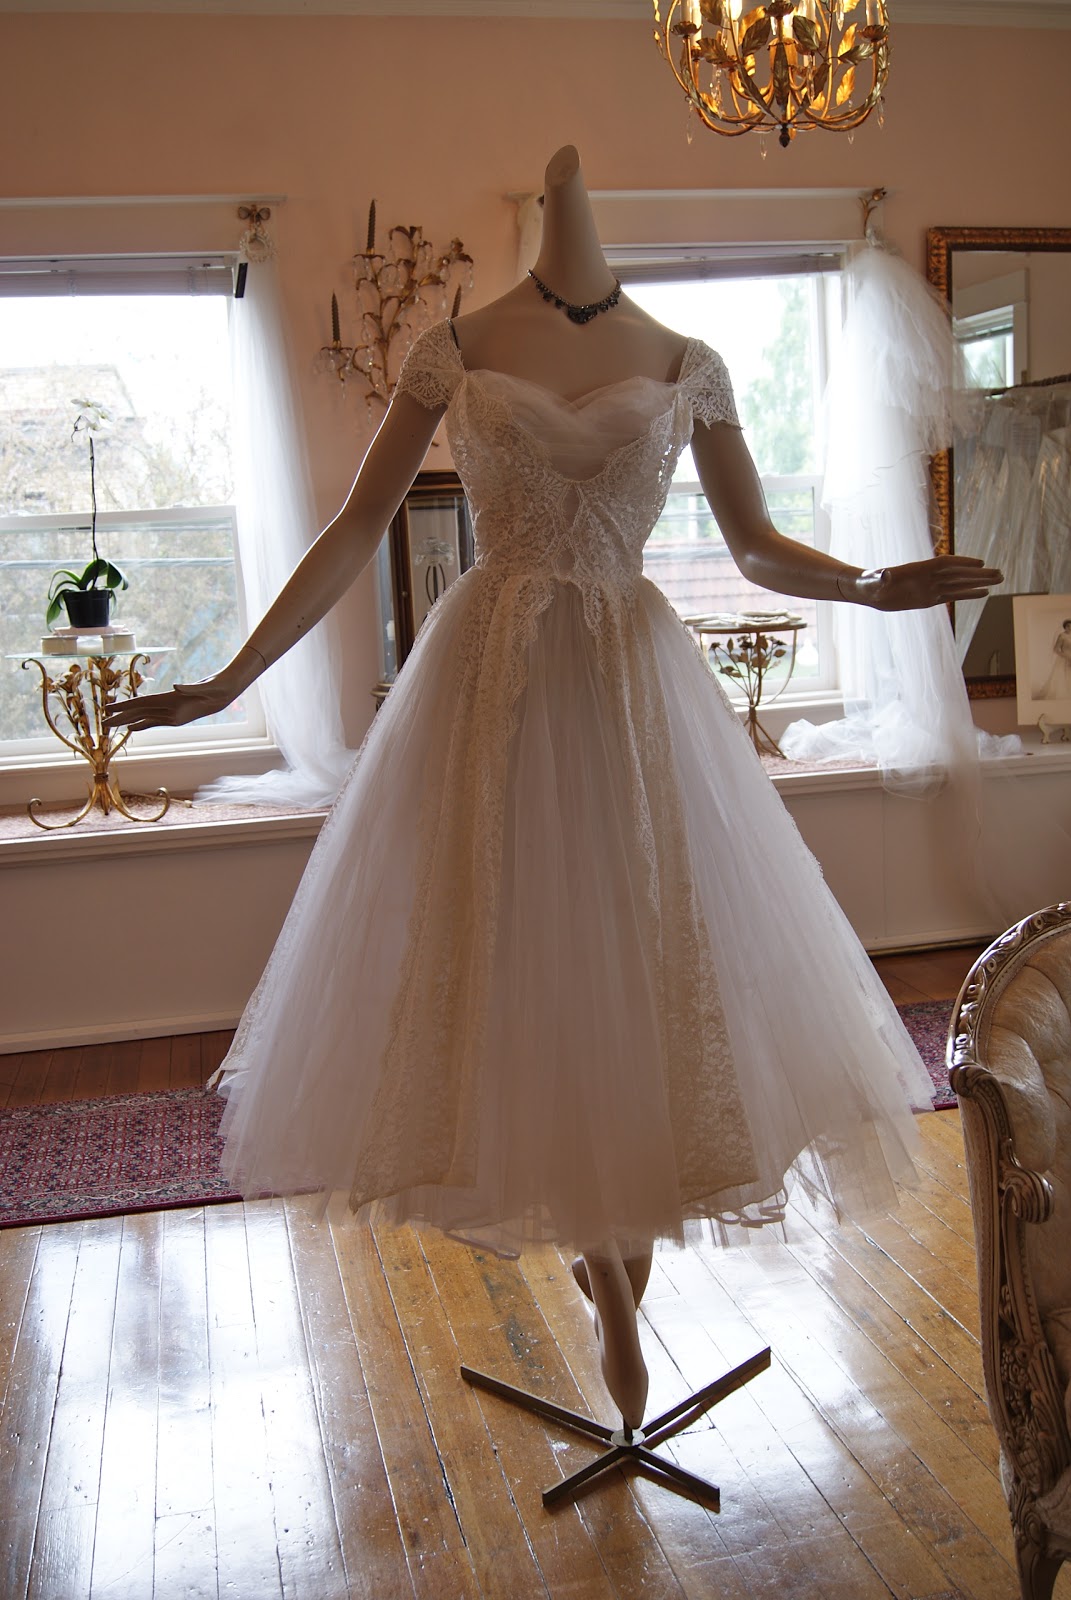 lace wedding dress with off the shoulder sleeves  Ballerina dress by Lorie Deb, pleated tulle with lace panels